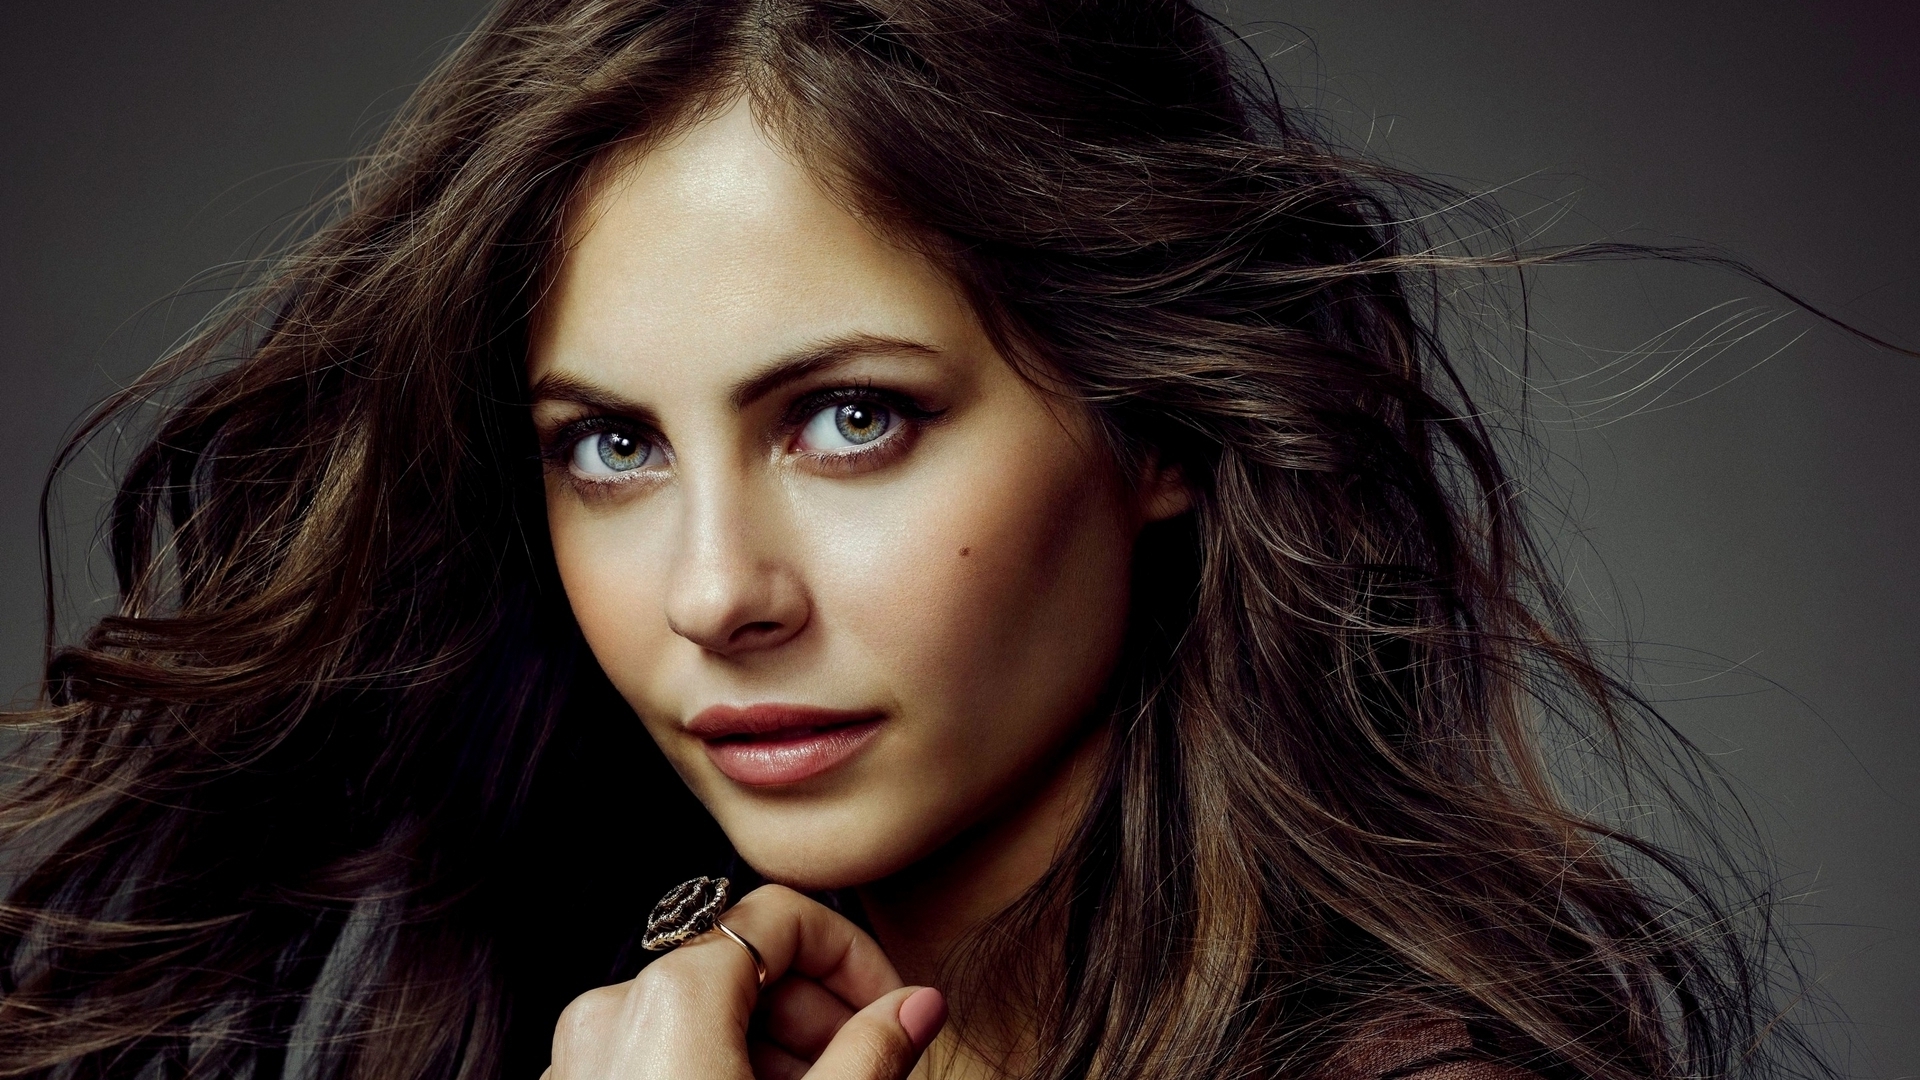 Willa Holland Wallpaper Image Photos Pictures Background